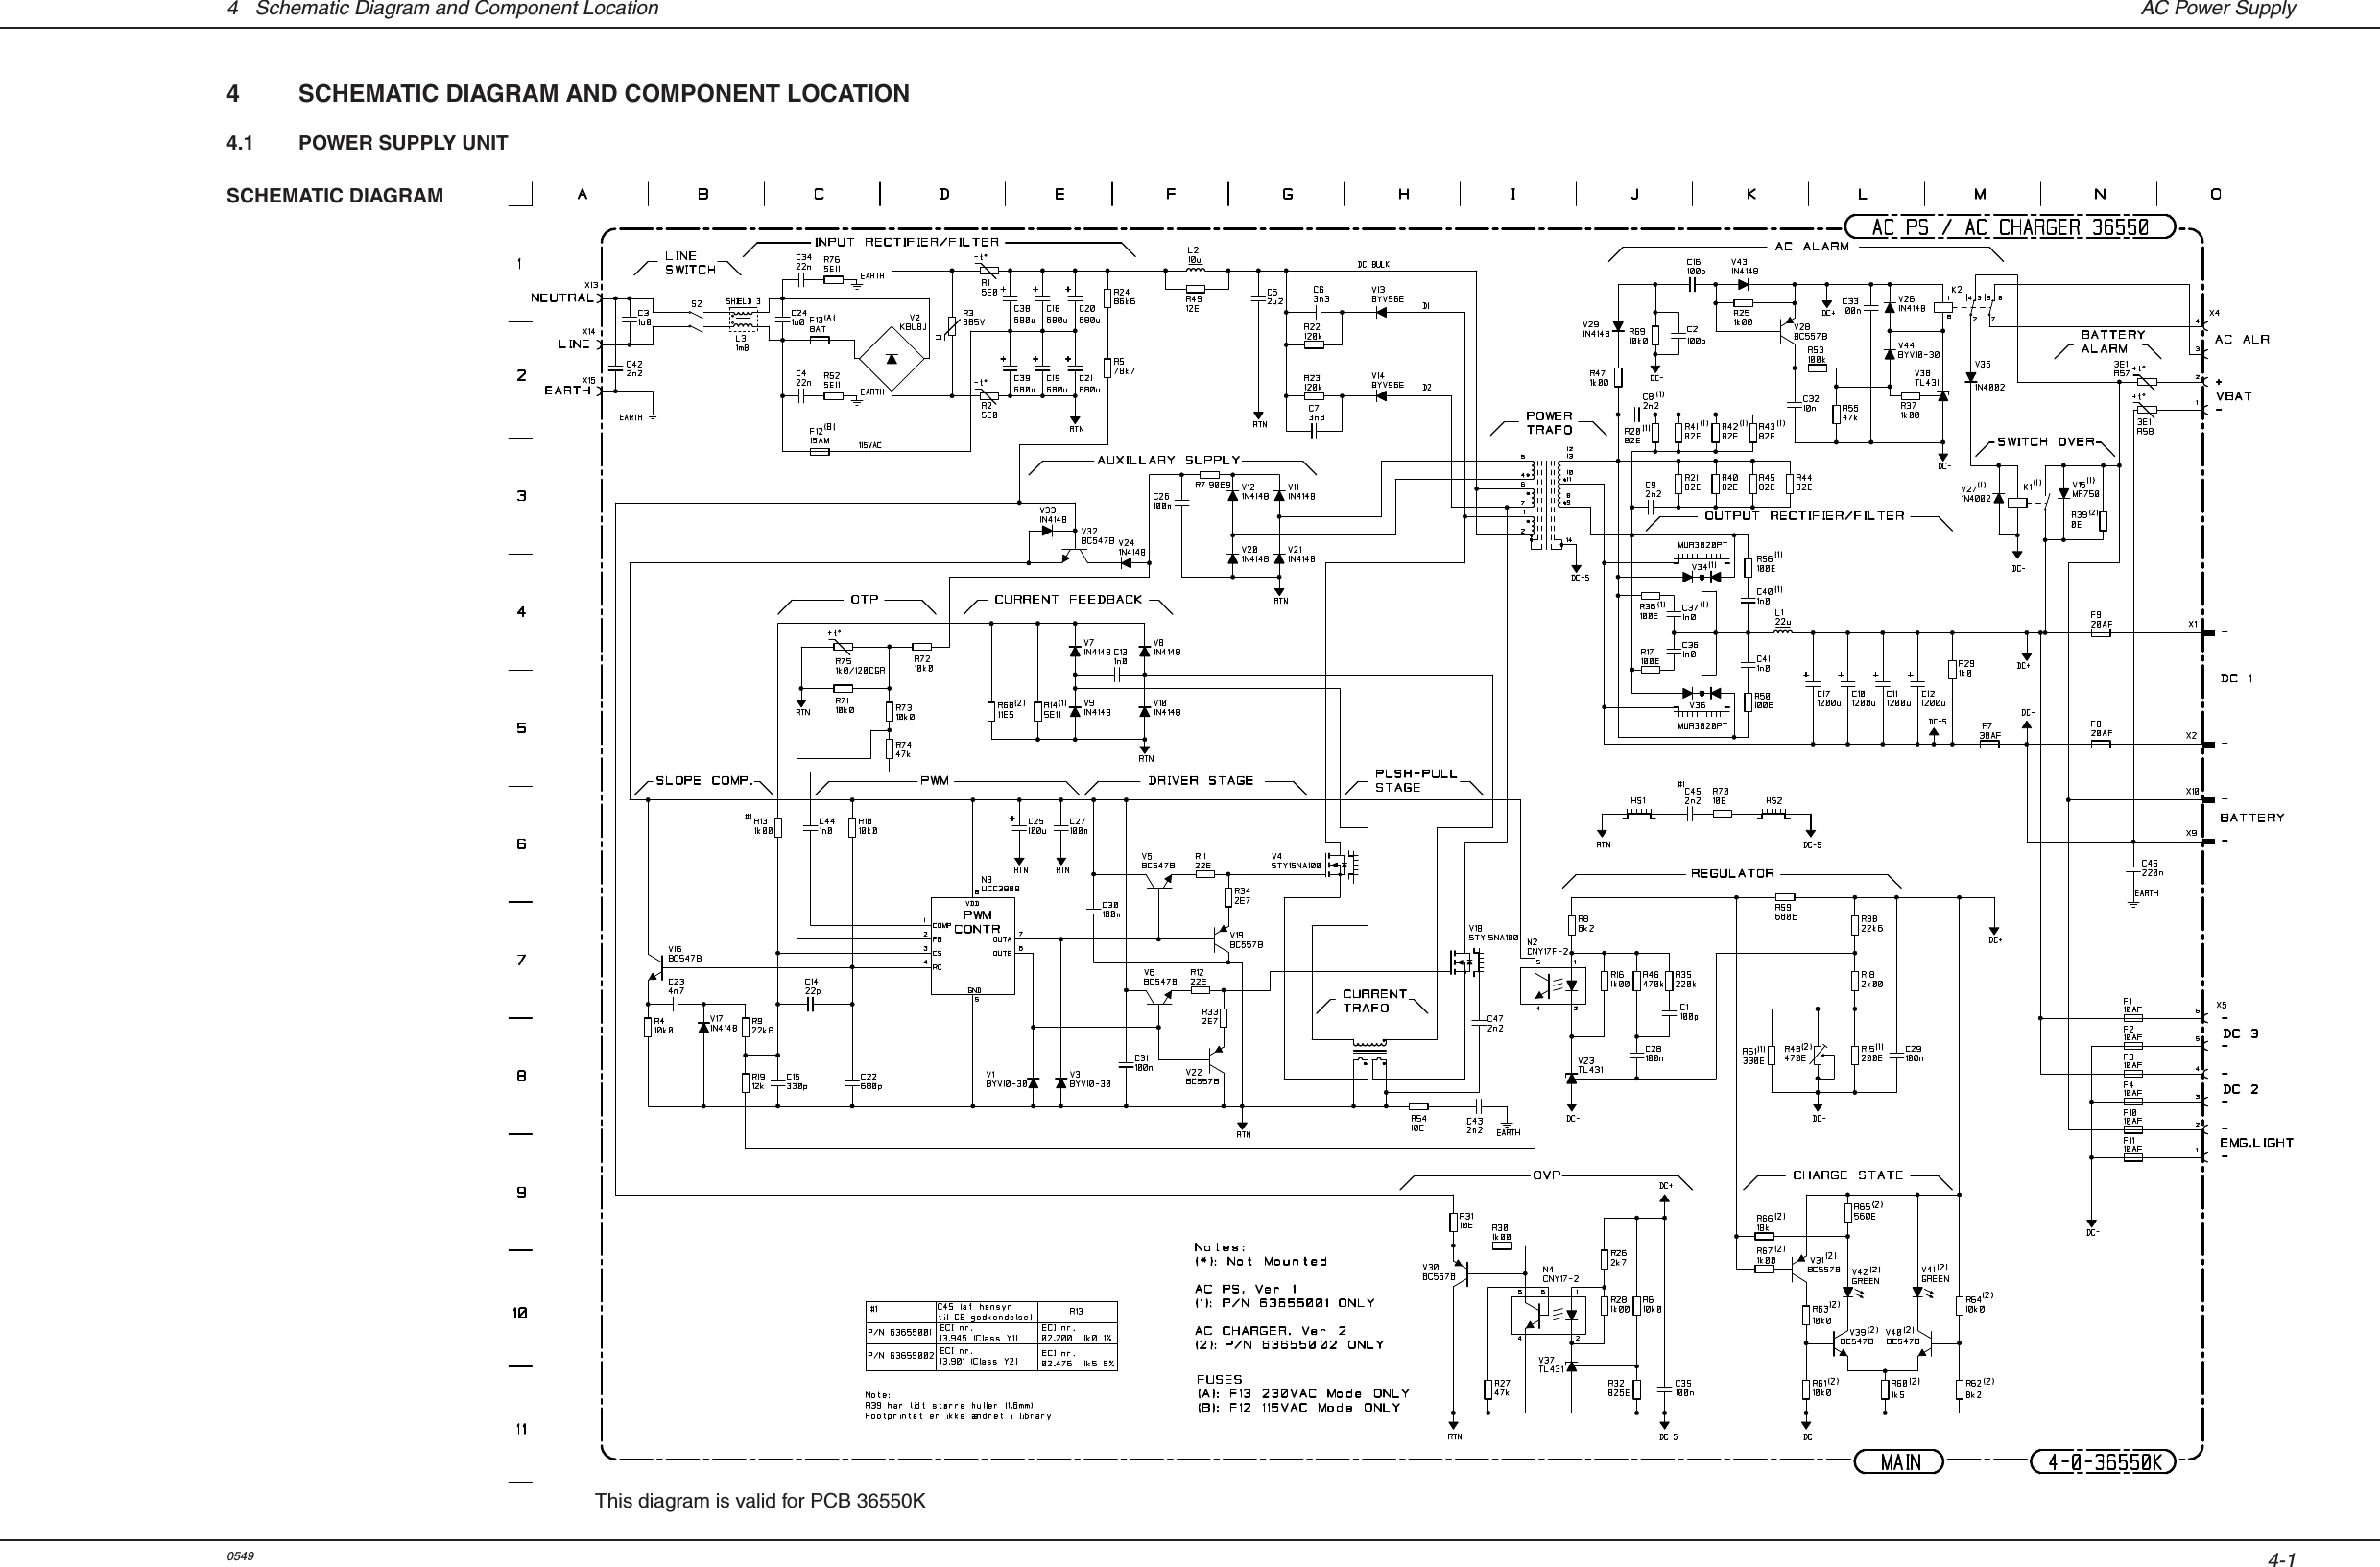 4-14  Schematic Diagram and Component Location  AC Power Supply4  SCHEMATIC DIAGRAM AND COMPONENT LOCATION4.1  POWER SUPPLY UNITSCHEMATIC DIAGRAMThis diagram is valid for PCB 36550K0549